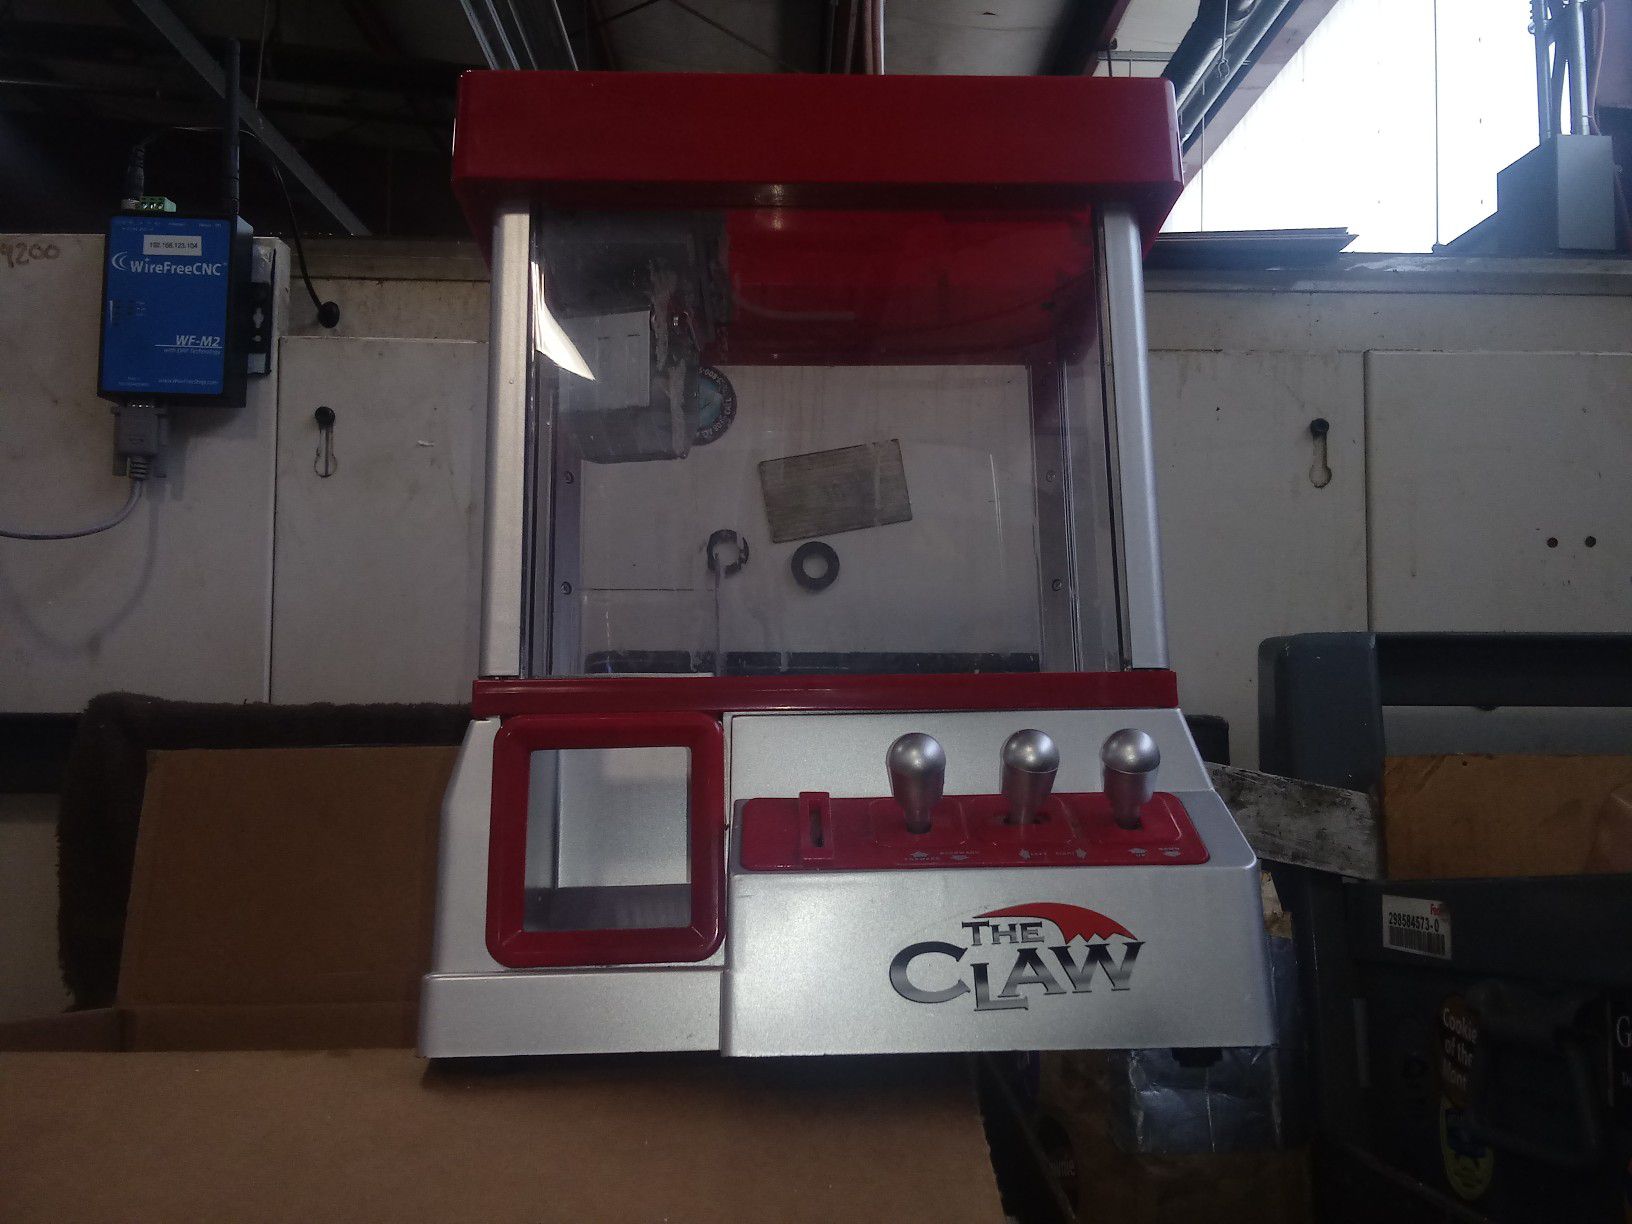 The Claw candy dispenser